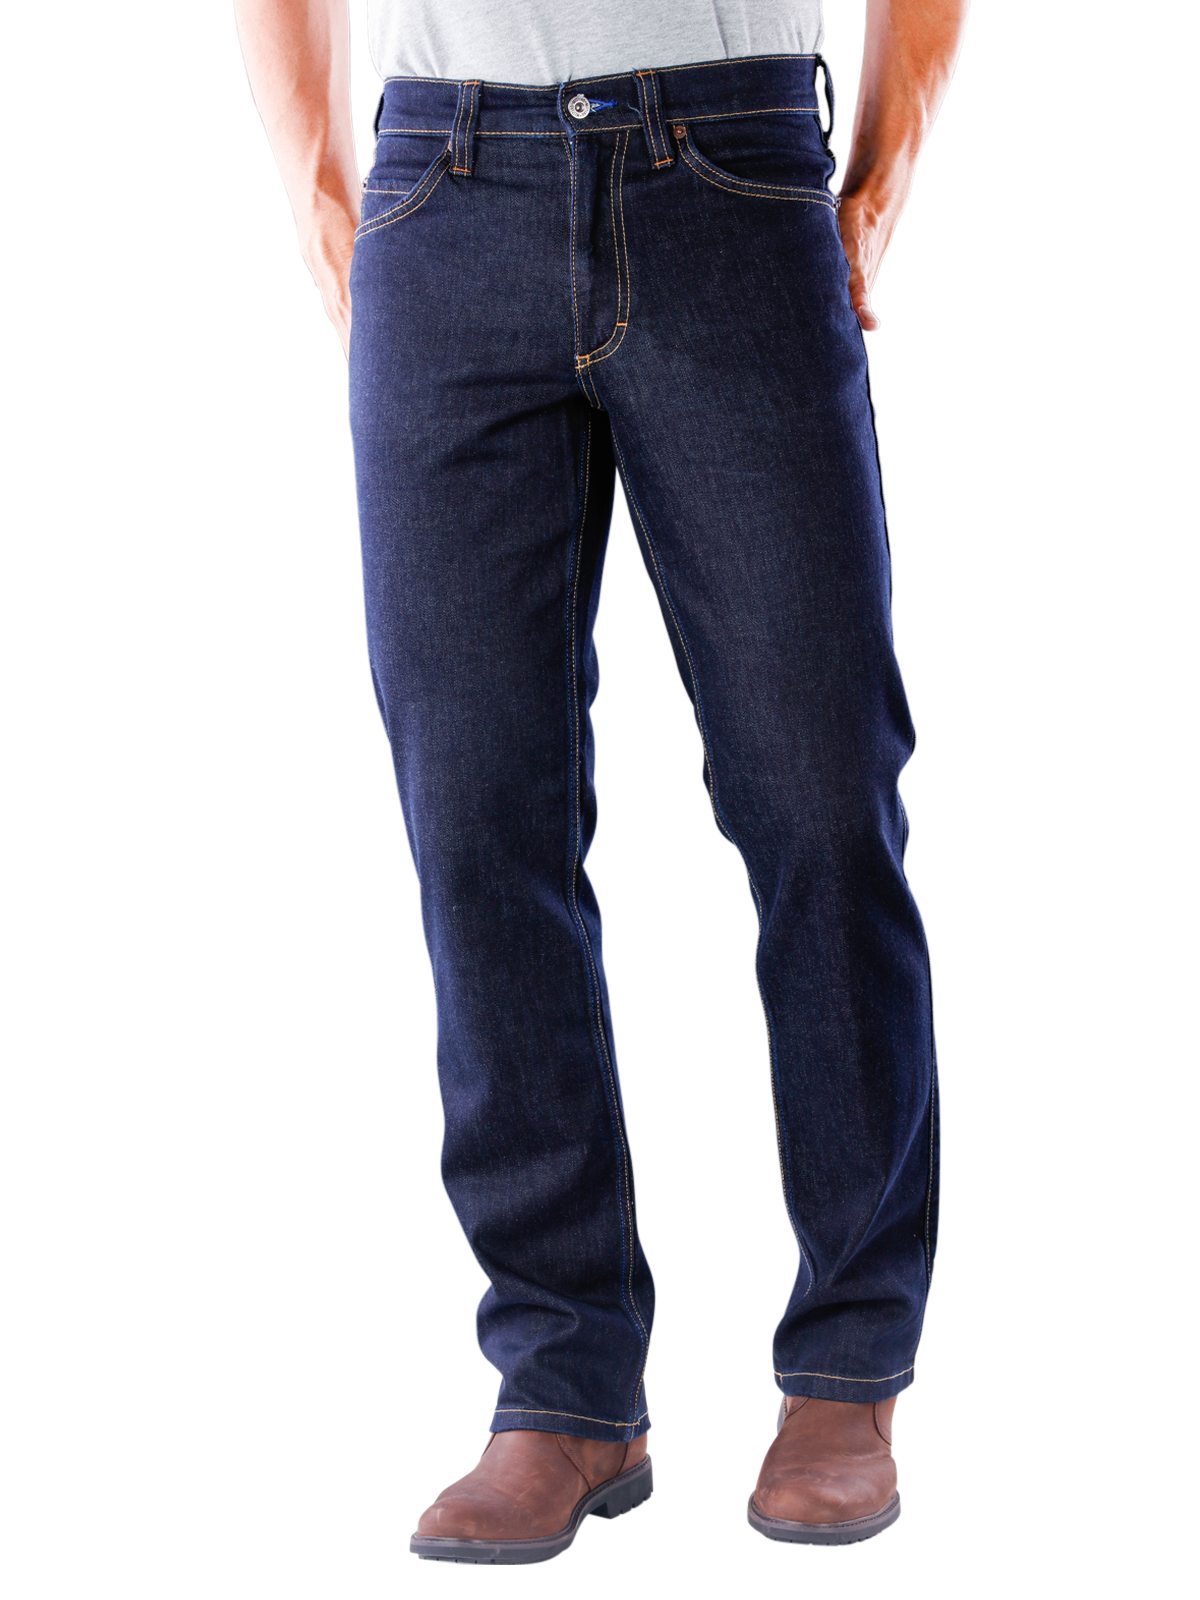 MUSTANG TRAMPER STRETCH JEANS - Barry's Shop